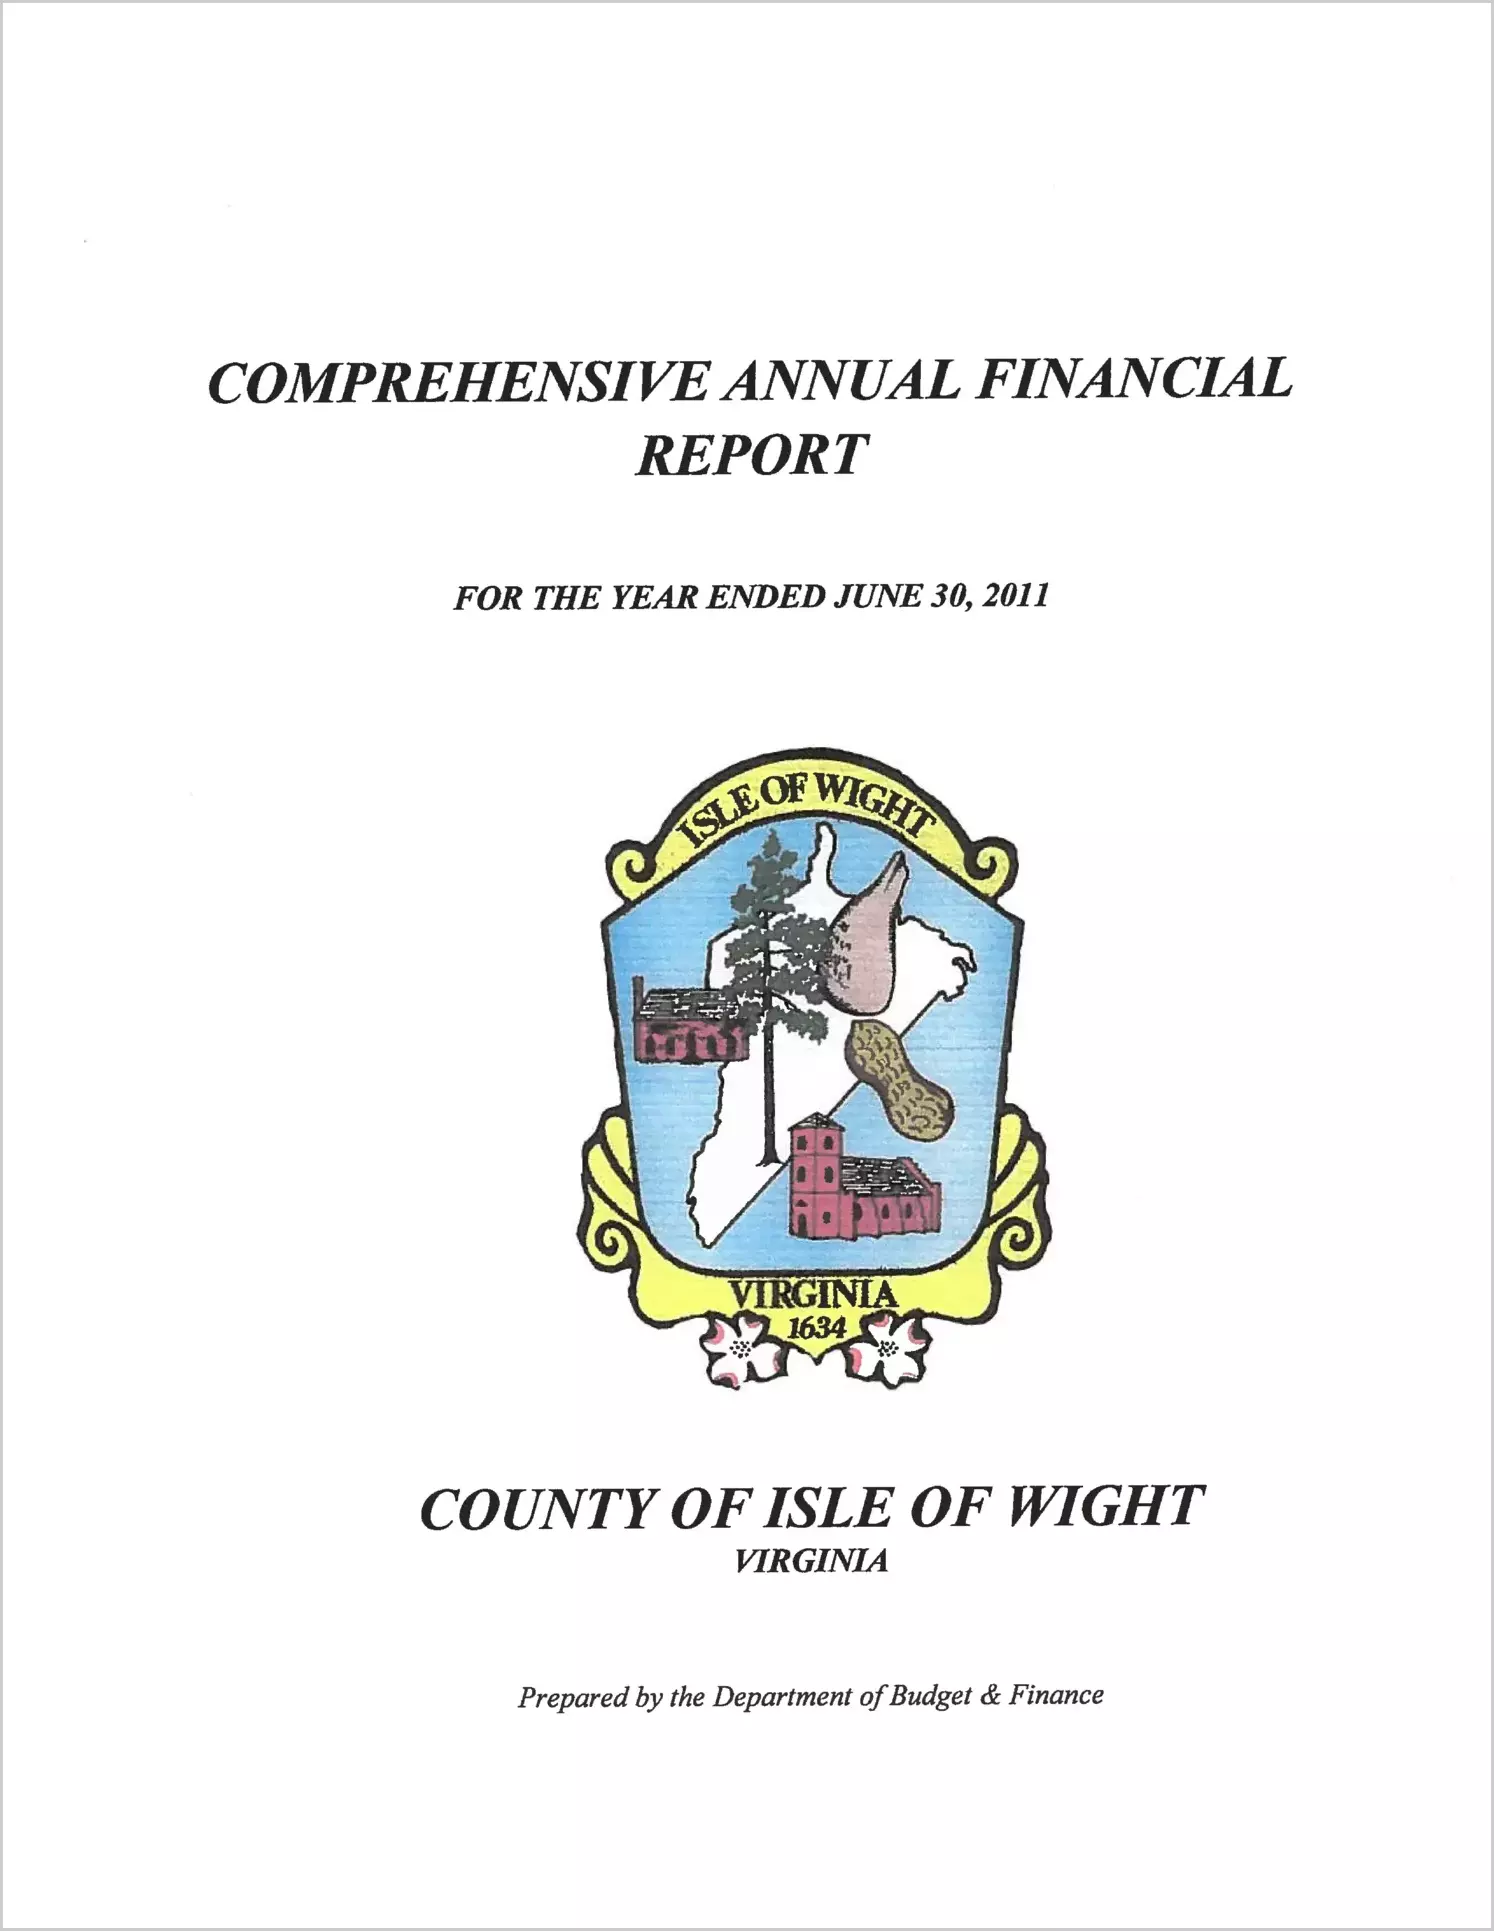 2011 Annual Financial Report for County of Isle of Wight